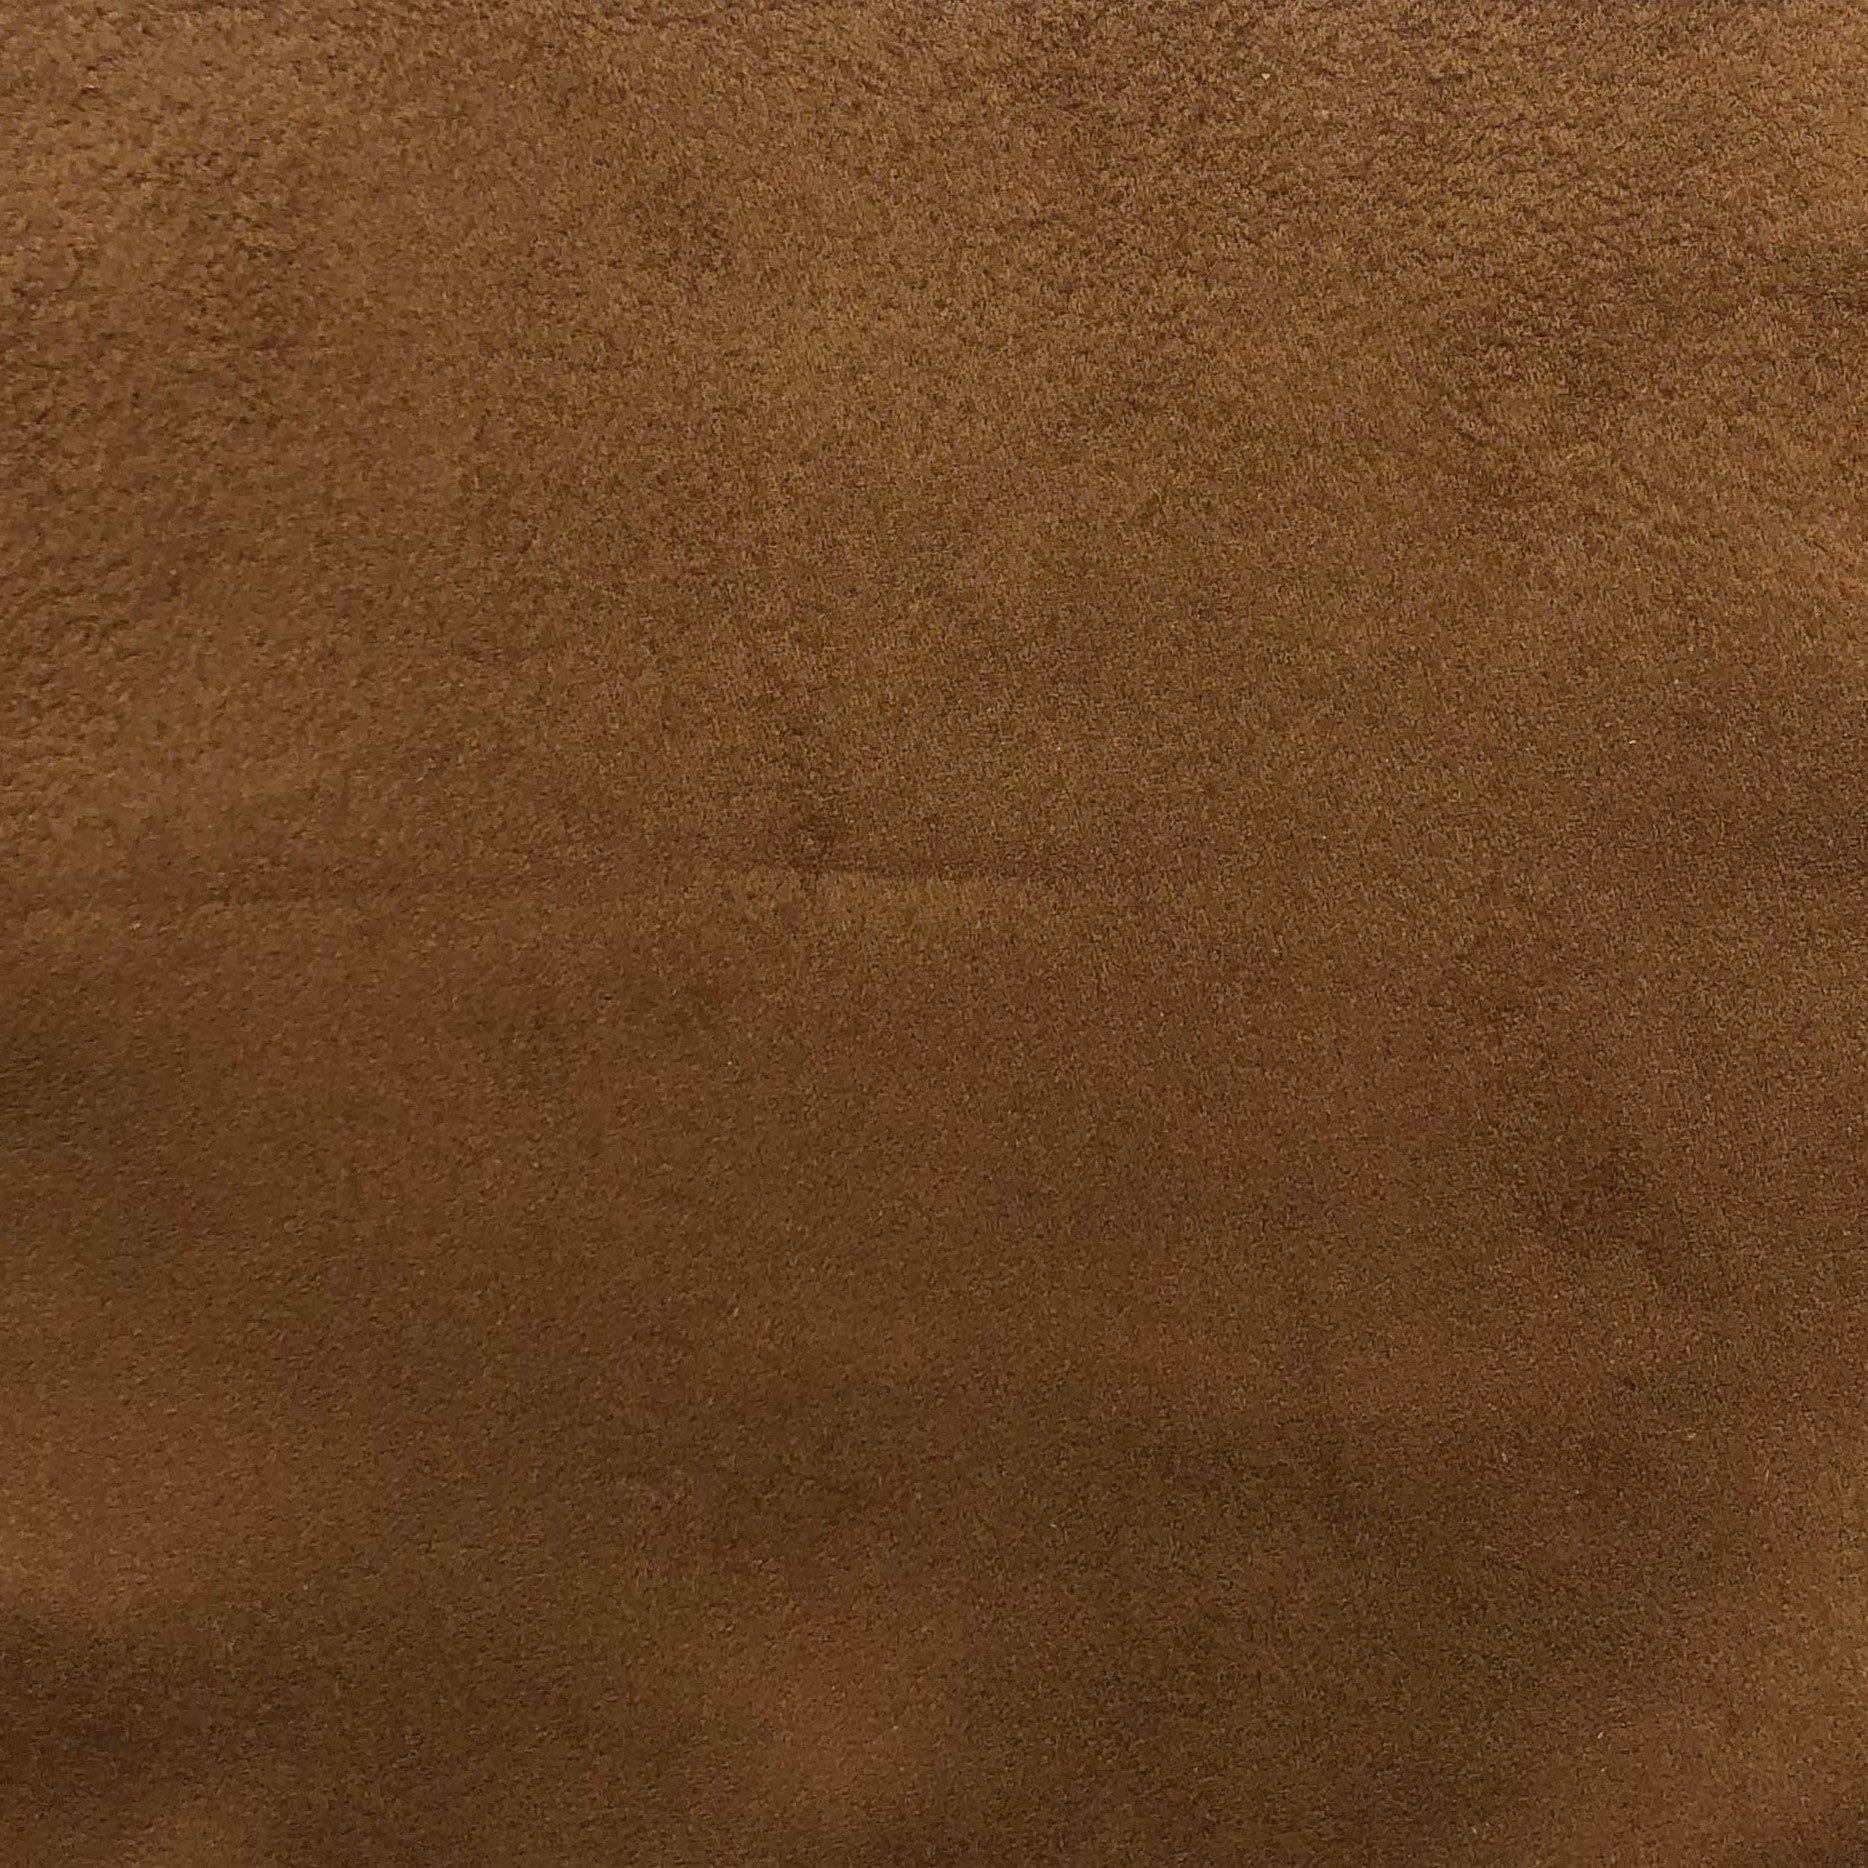 HiEnd Accents Highland Lodge Suede Fabric Swatch